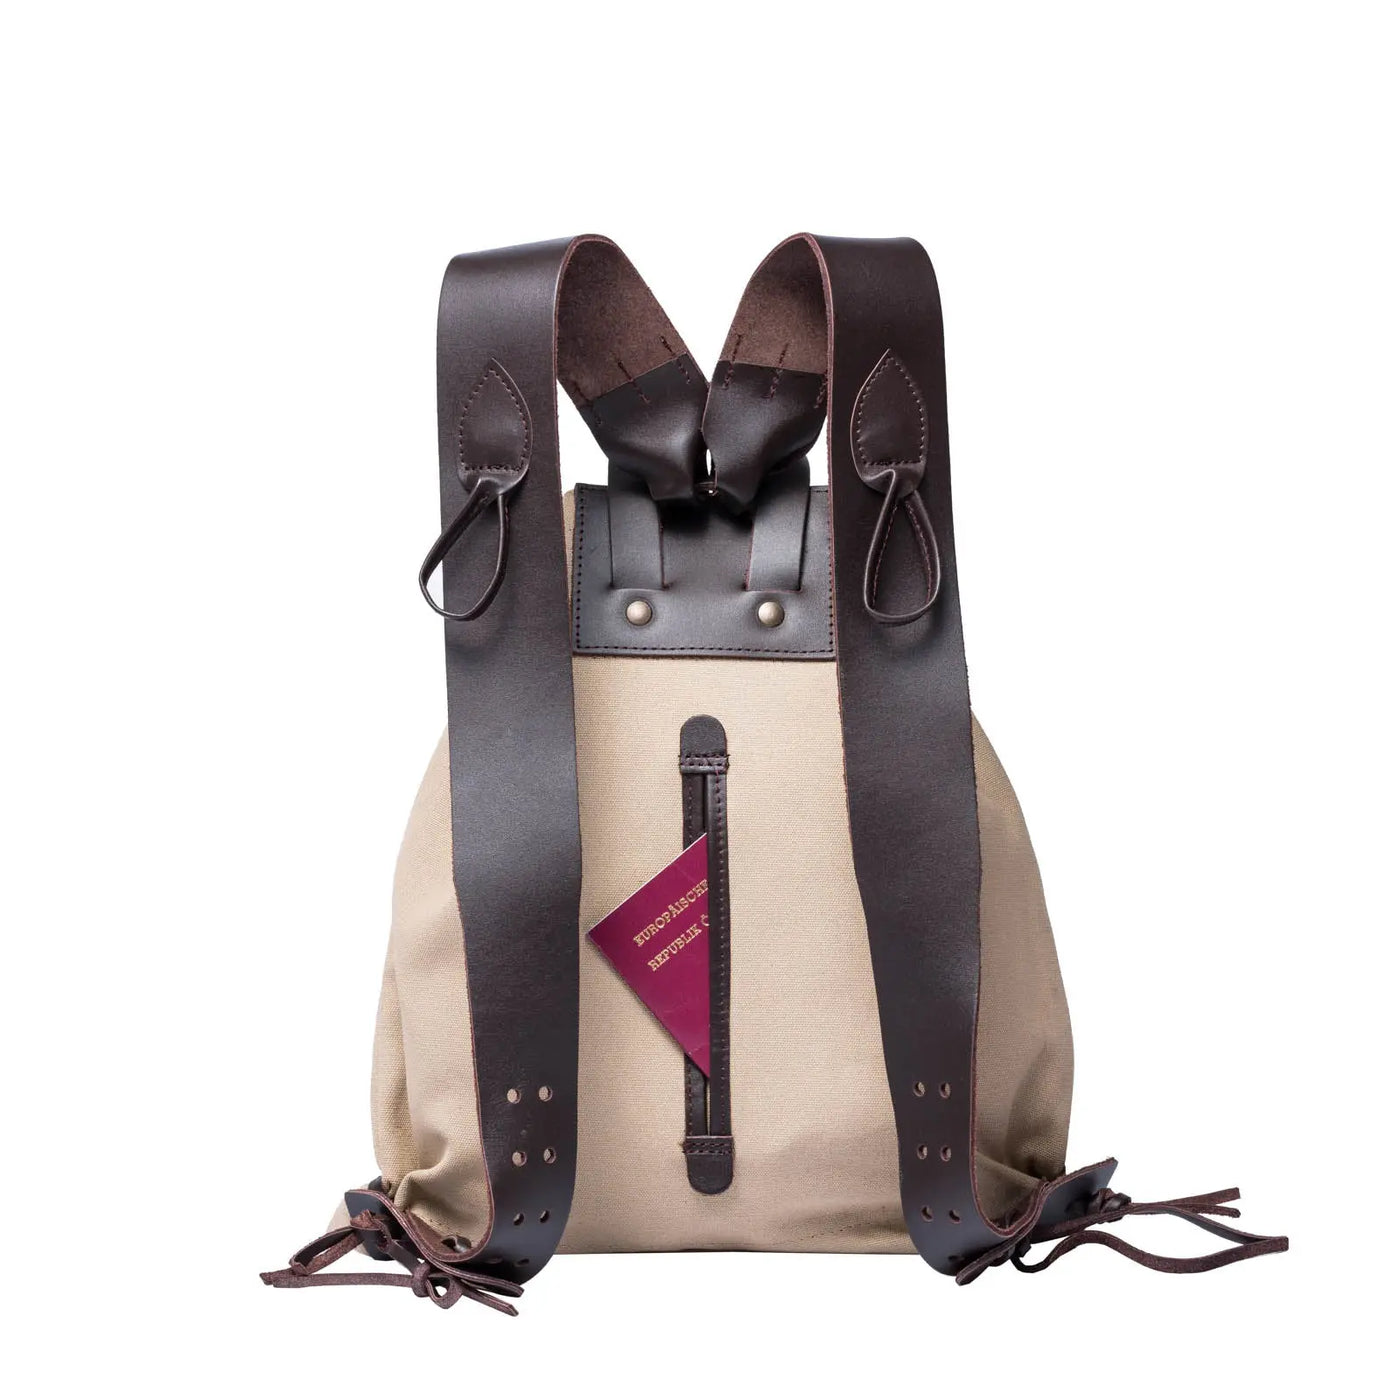 Attersee Alpine summer backpack